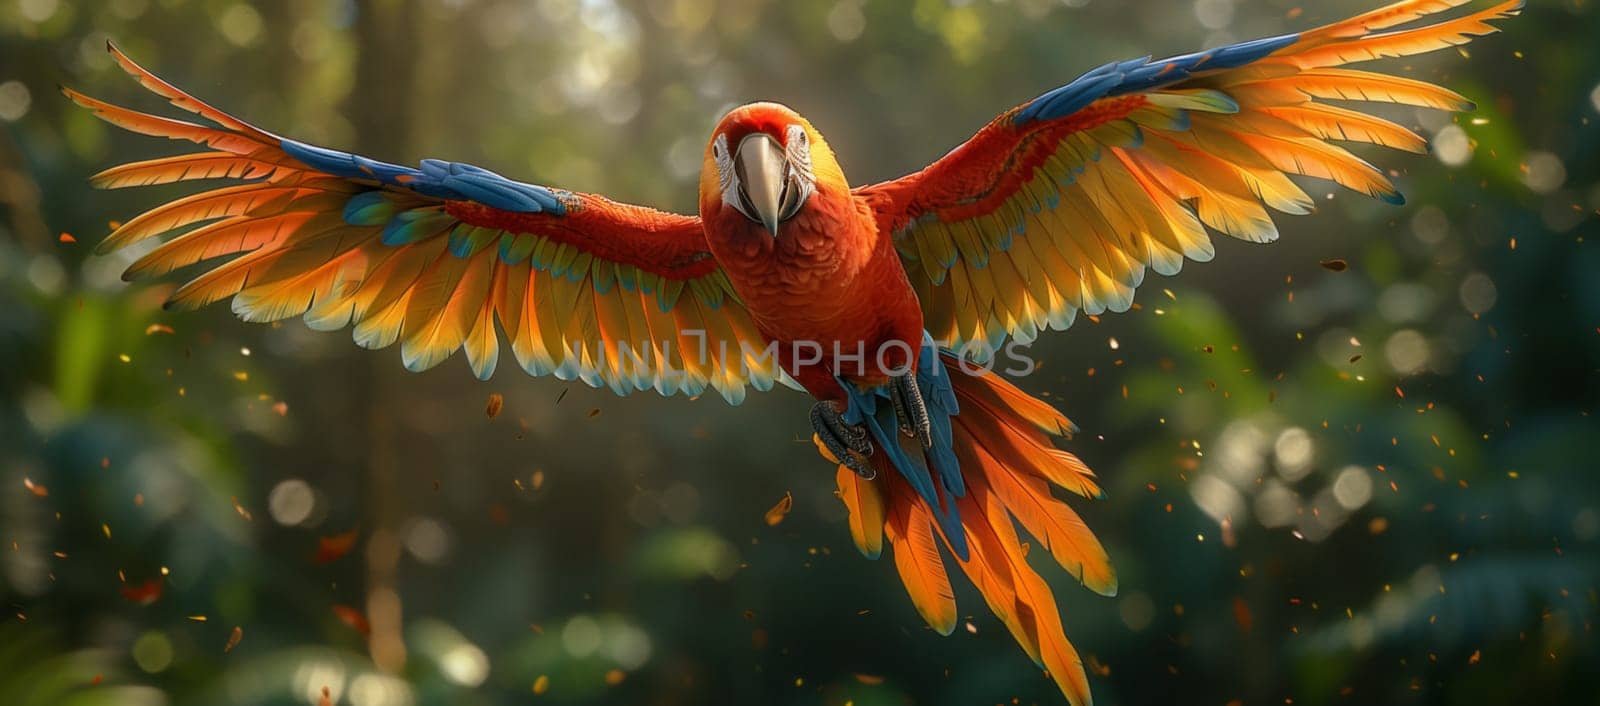 A colorful parrot with vibrant feathers is soaring in the jungles sky by richwolf